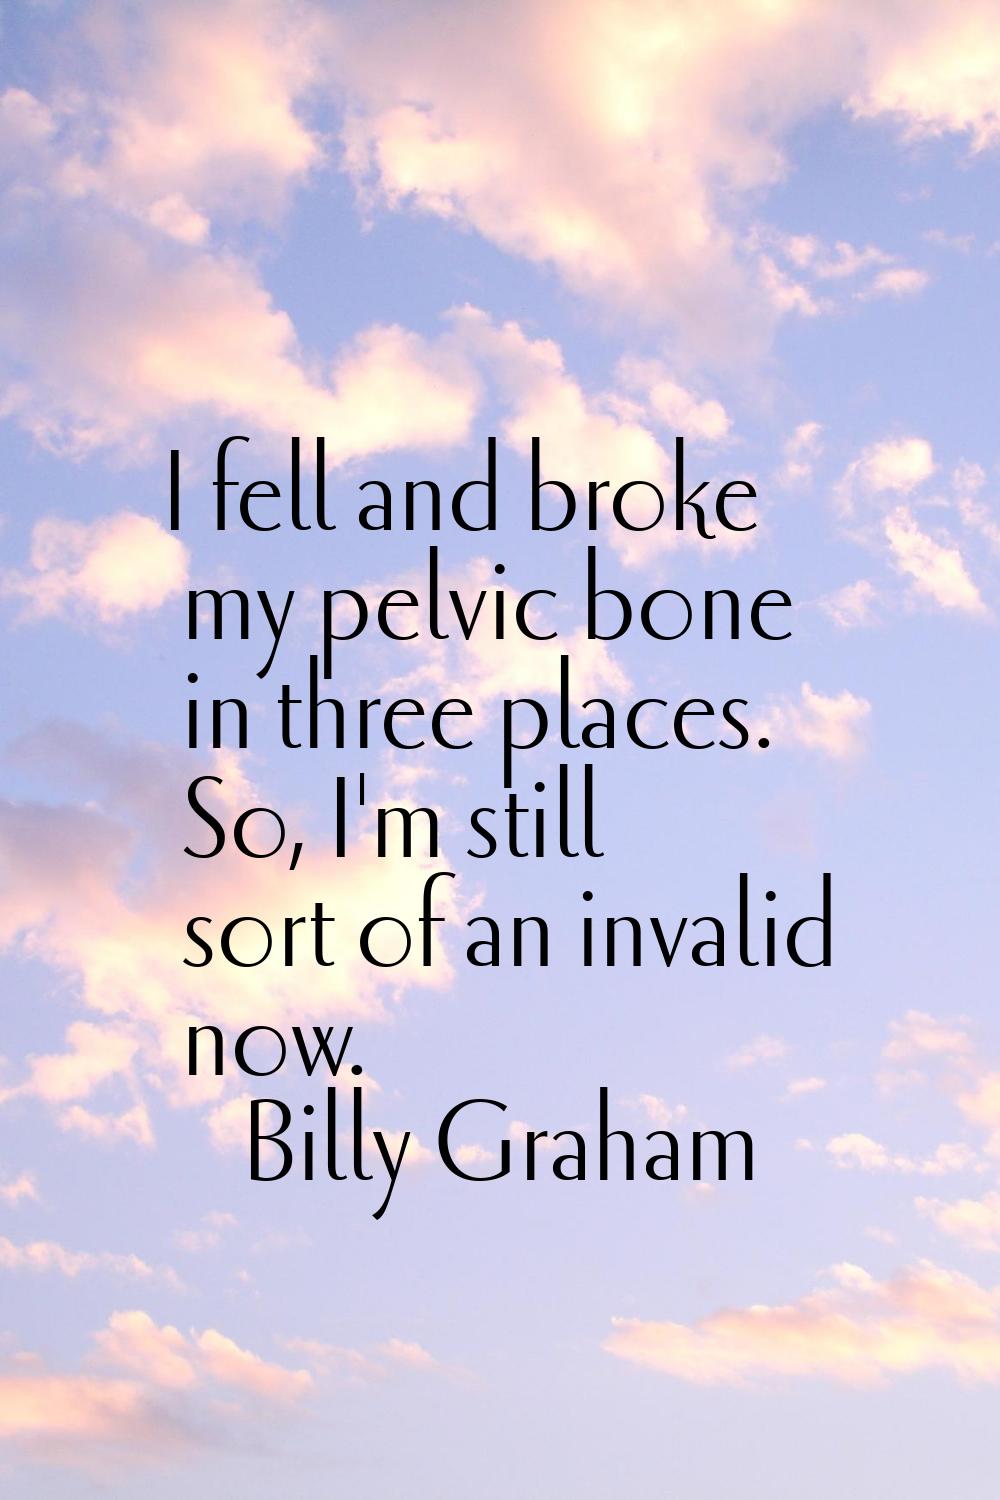 I fell and broke my pelvic bone in three places. So, I'm still sort of an invalid now.